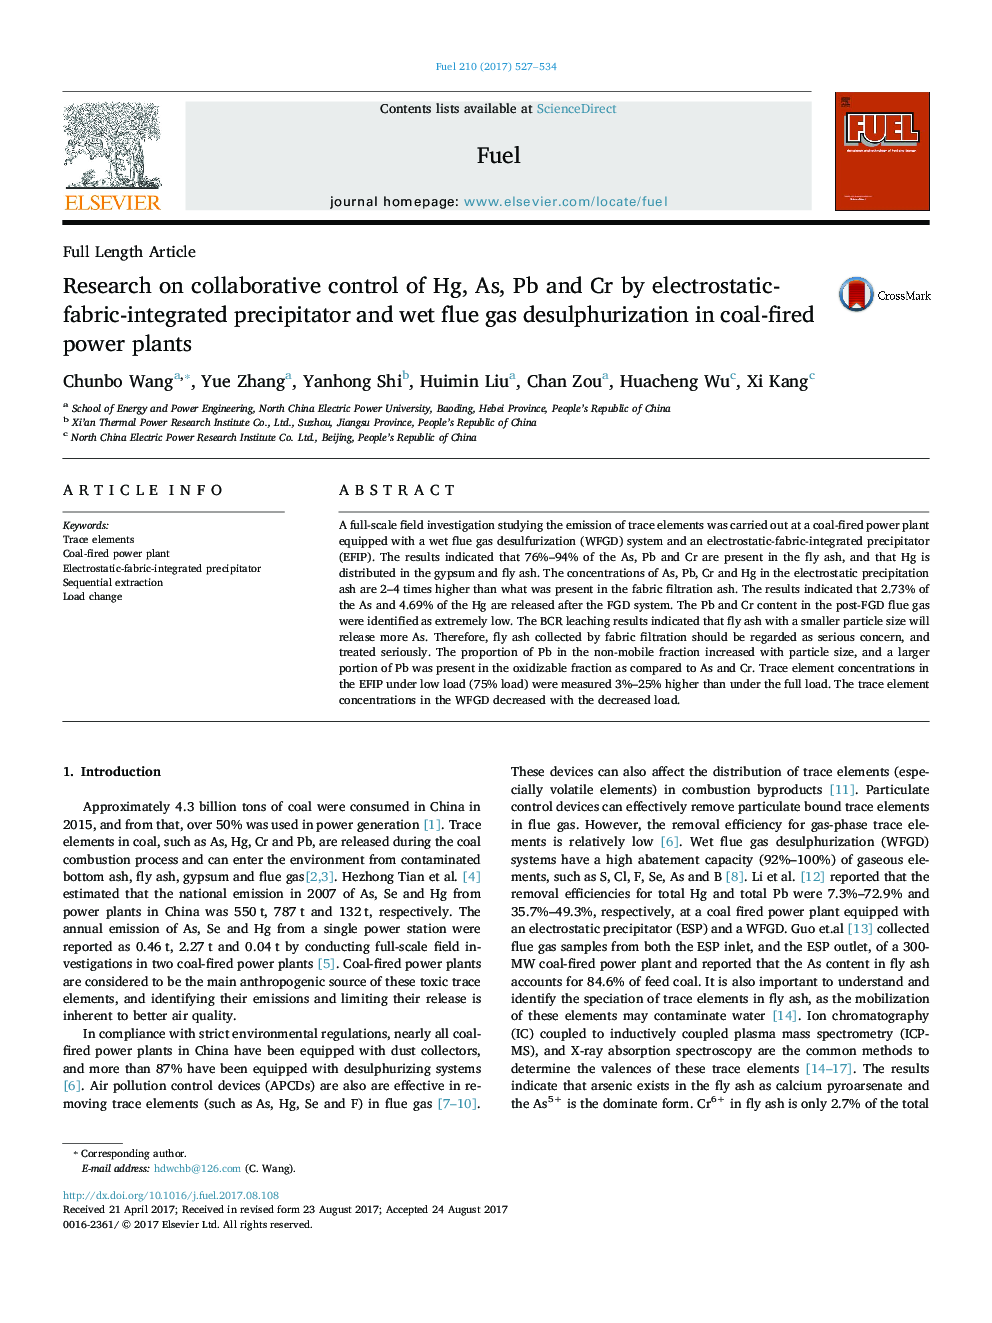 Research on collaborative control of Hg, As, Pb and Cr by electrostatic-fabric-integrated precipitator and wet flue gas desulphurization in coal-fired power plants